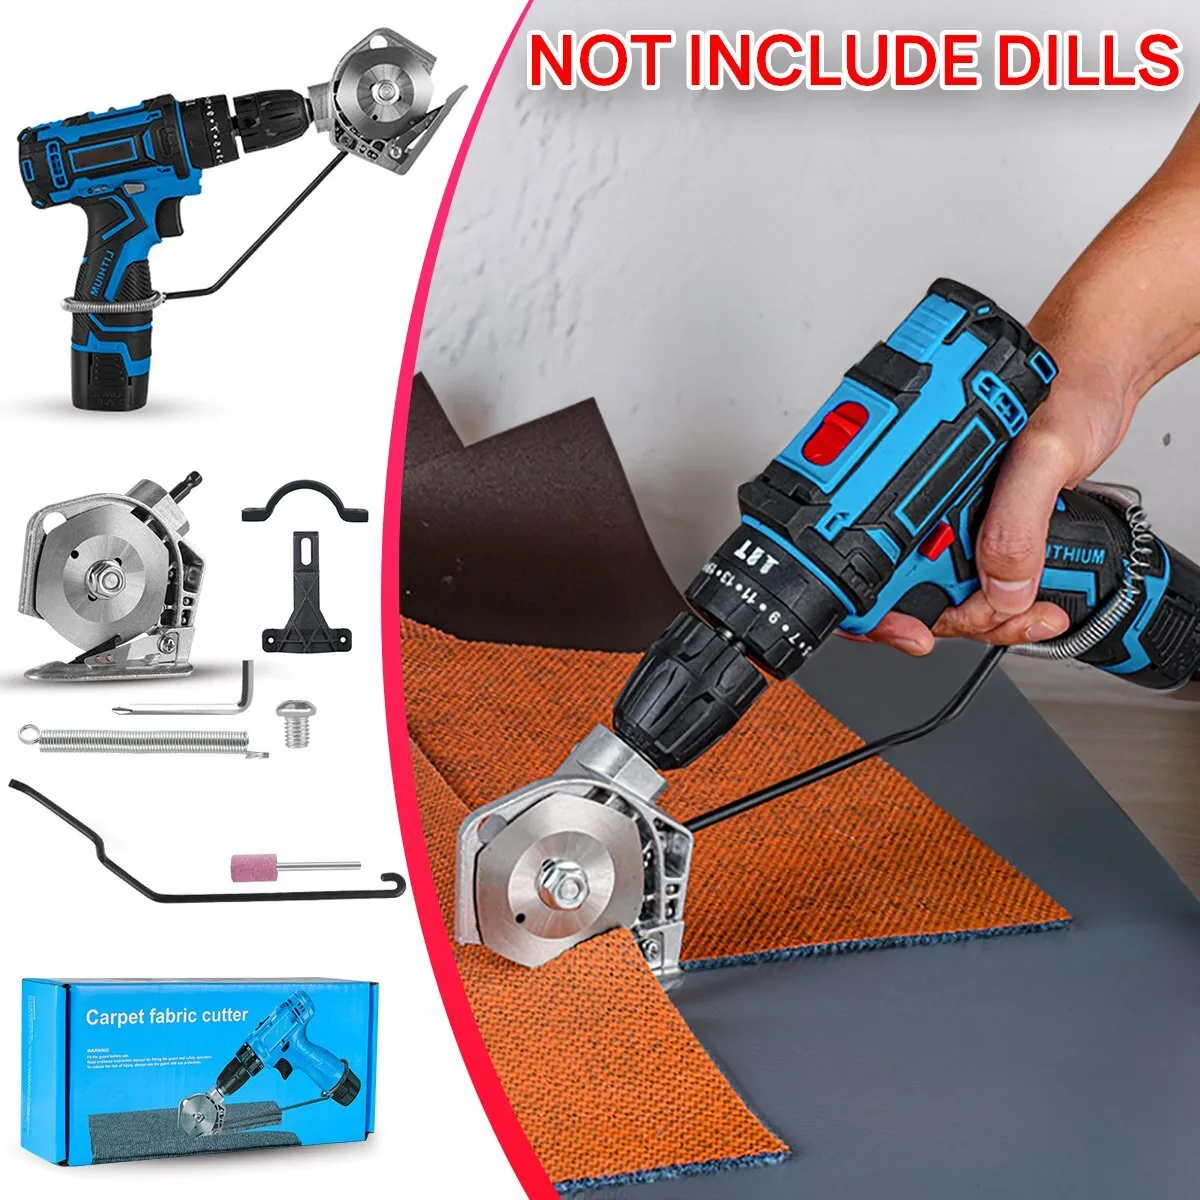 8 Best Electric Rotary Fabric Cutters 2019 